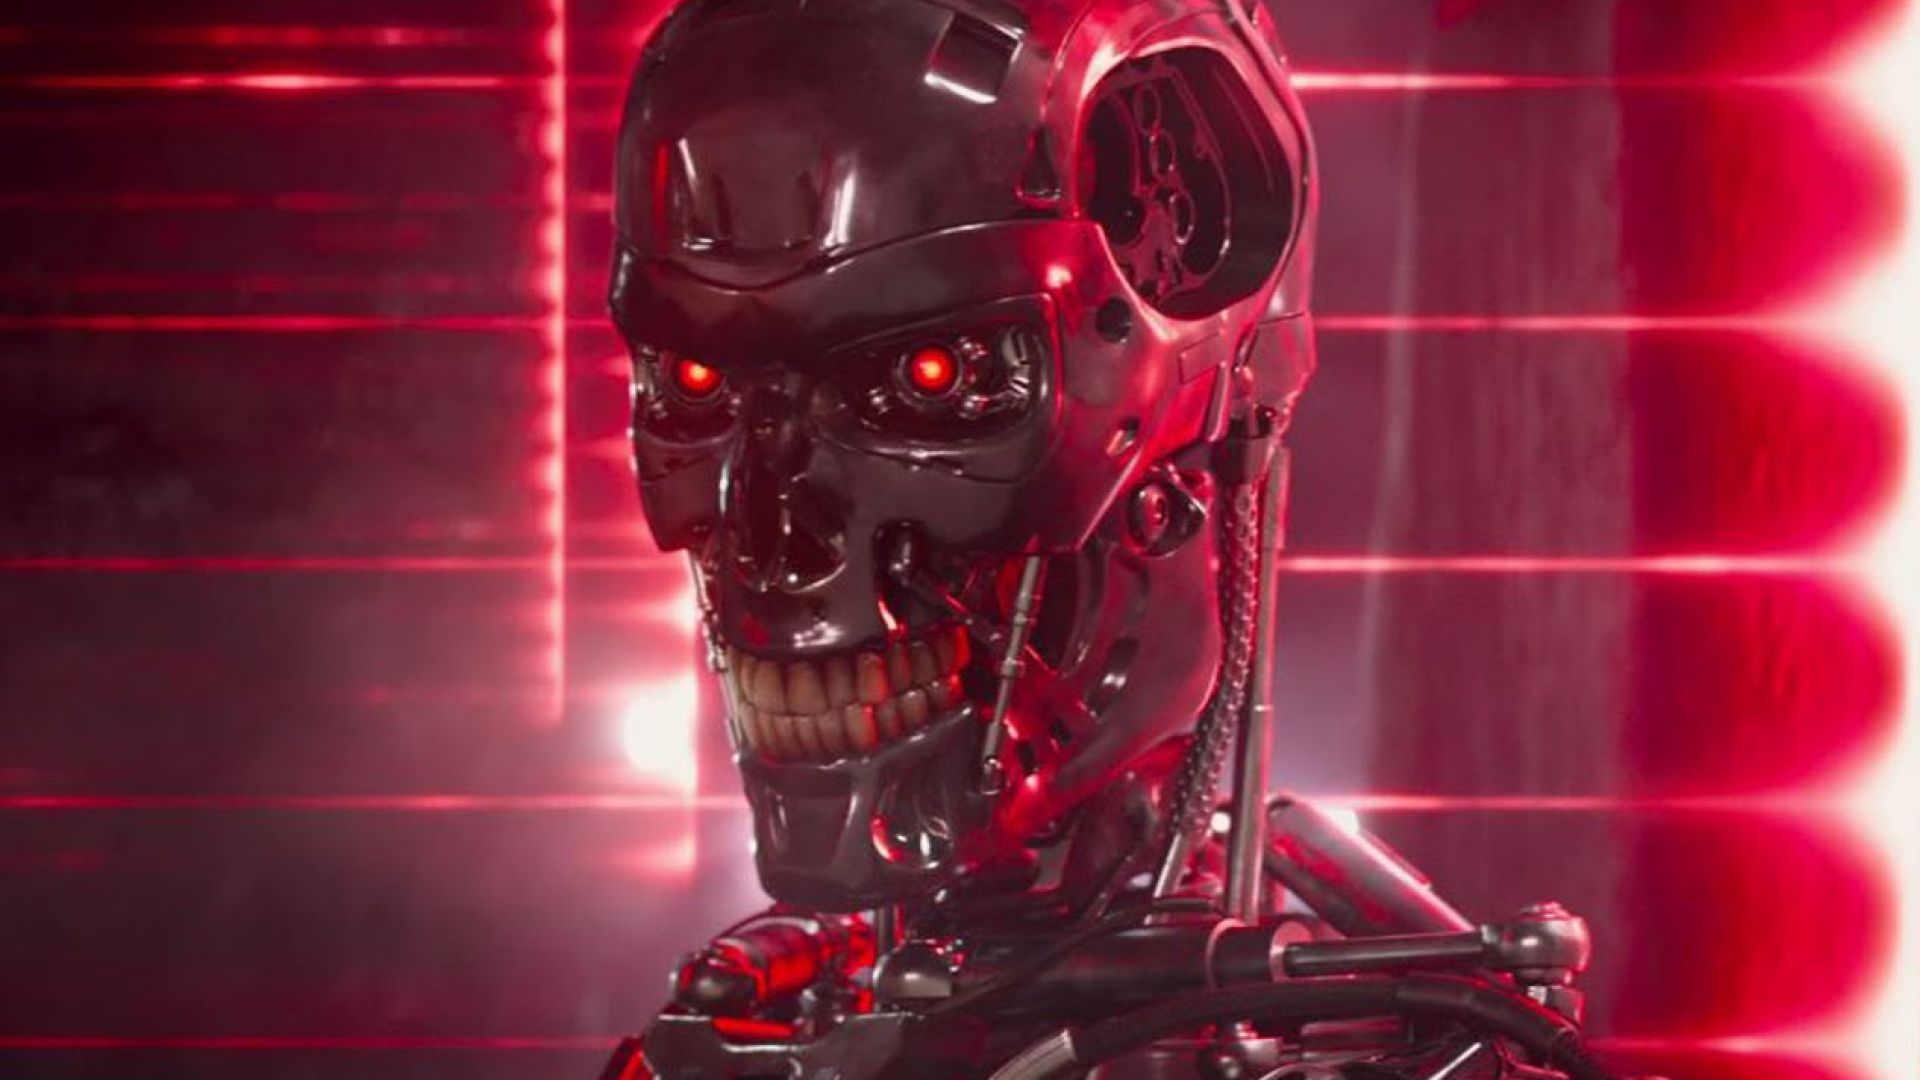 Second Official Trailer for 'Terminator Genisys'